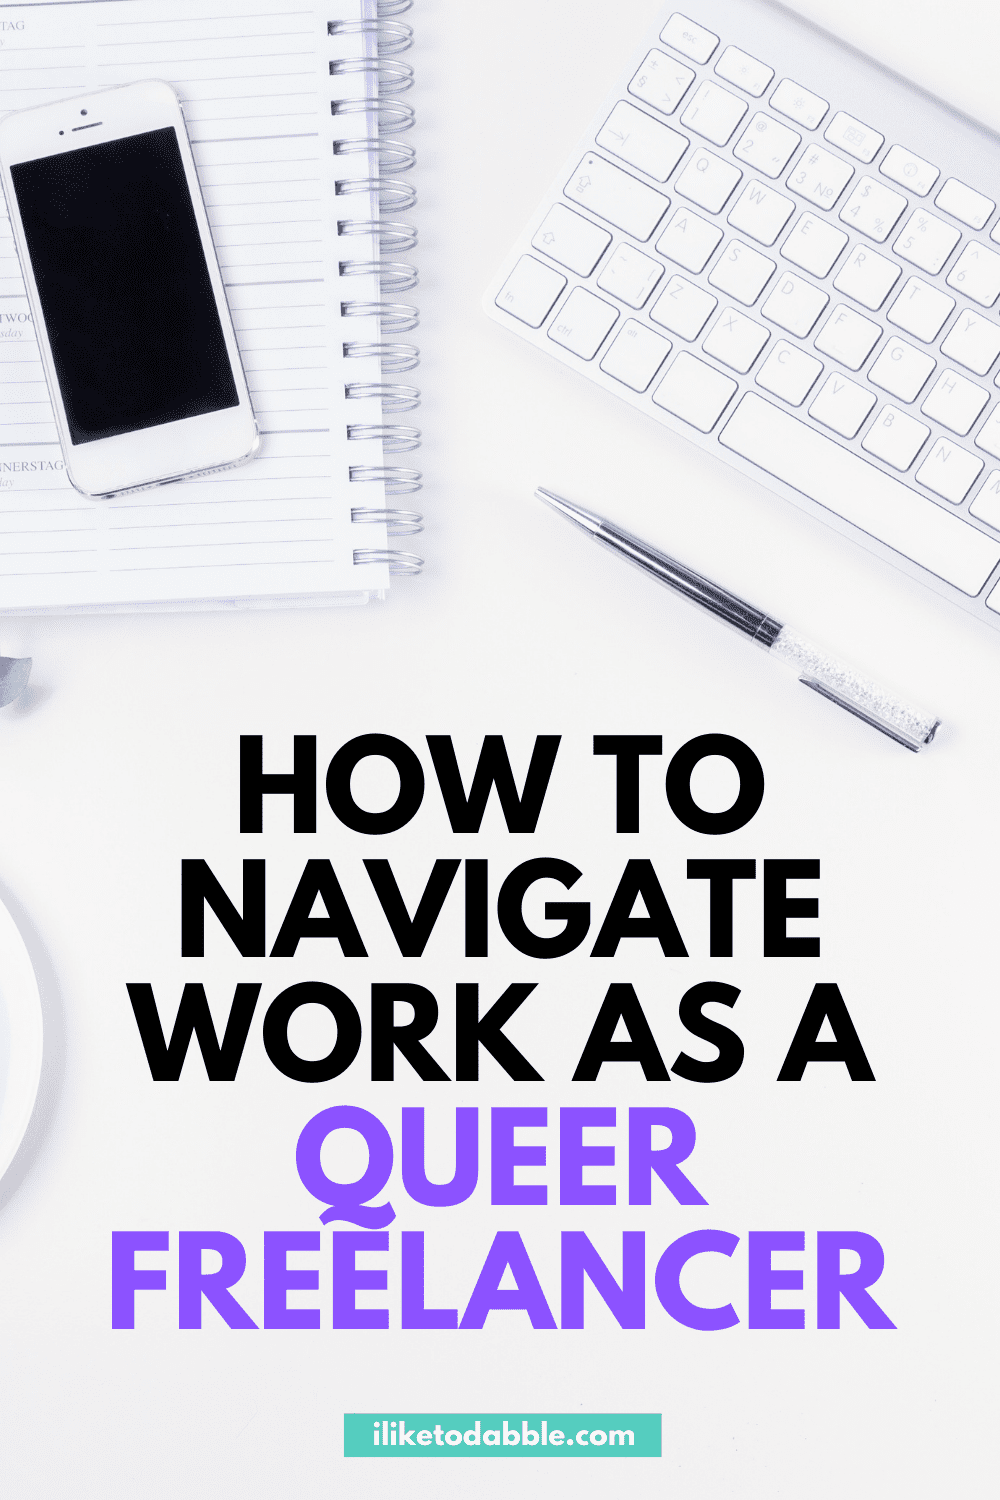 Mobile phone, notebook, and keyboard on a desk with title text that reads How to navigate work as a queer freelancer